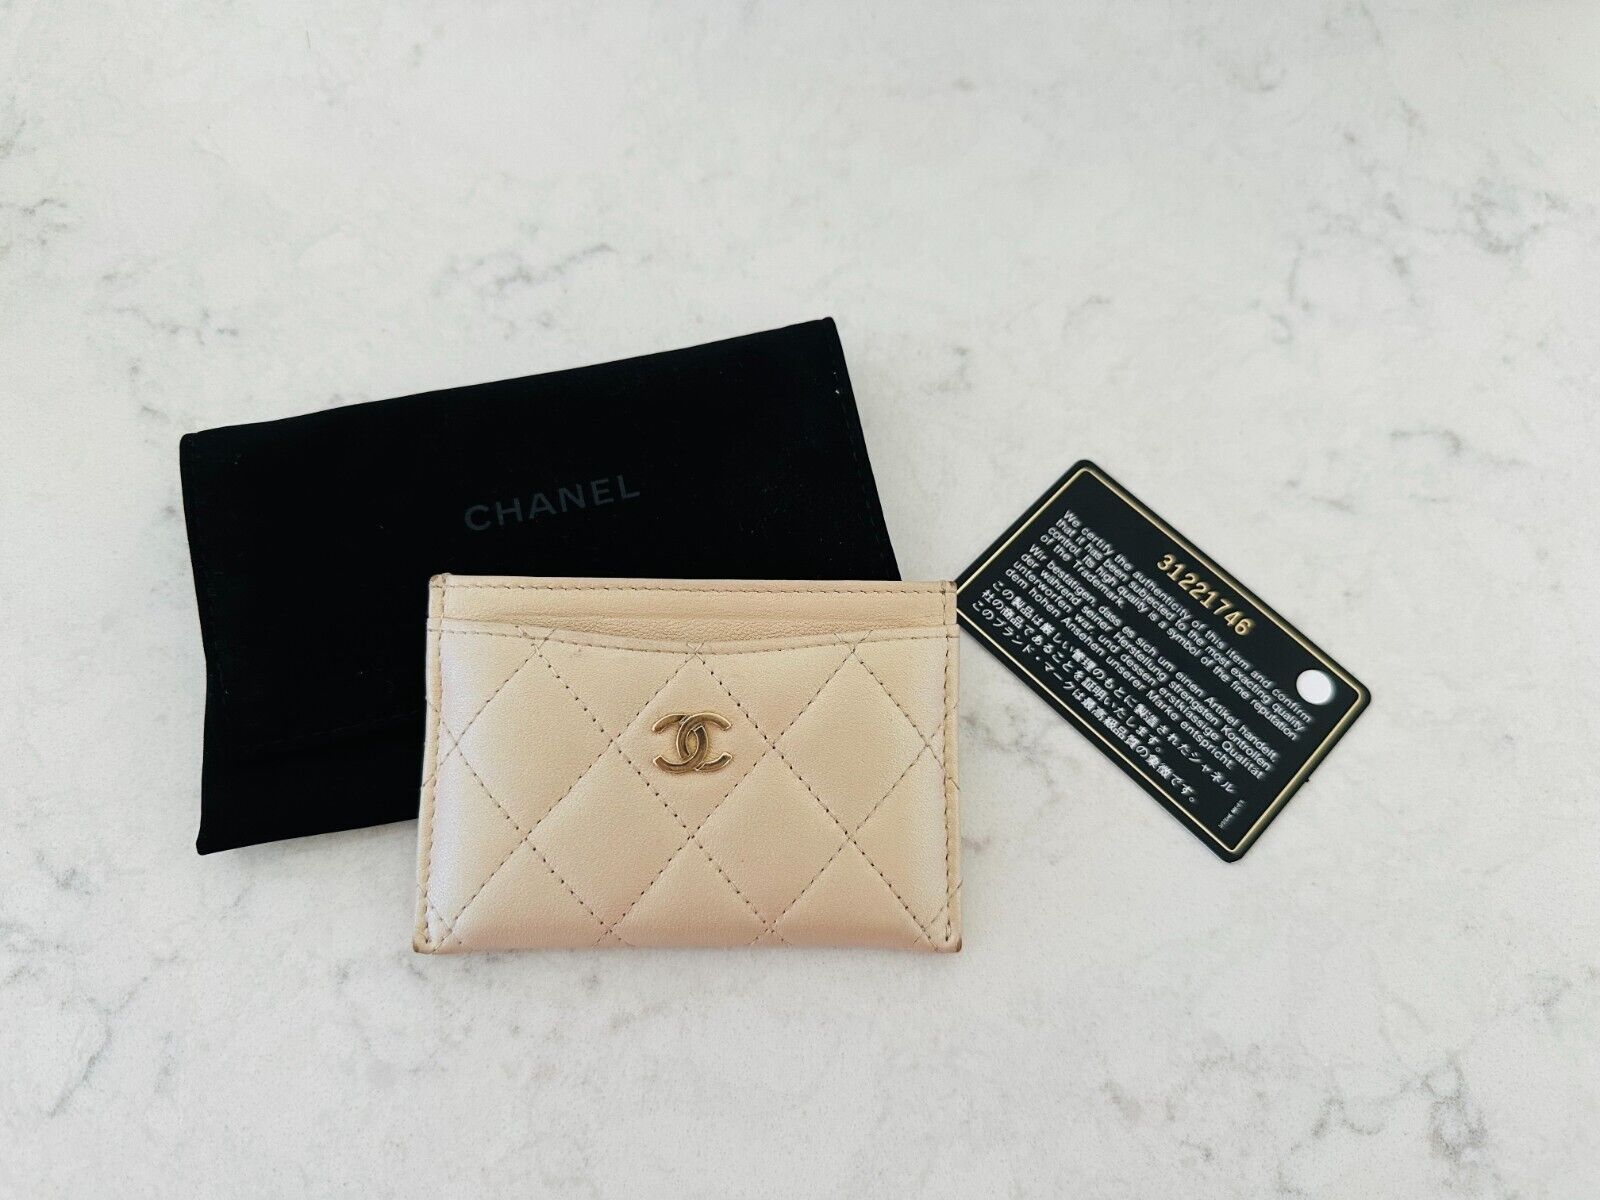 Authentic chanel card - Gem